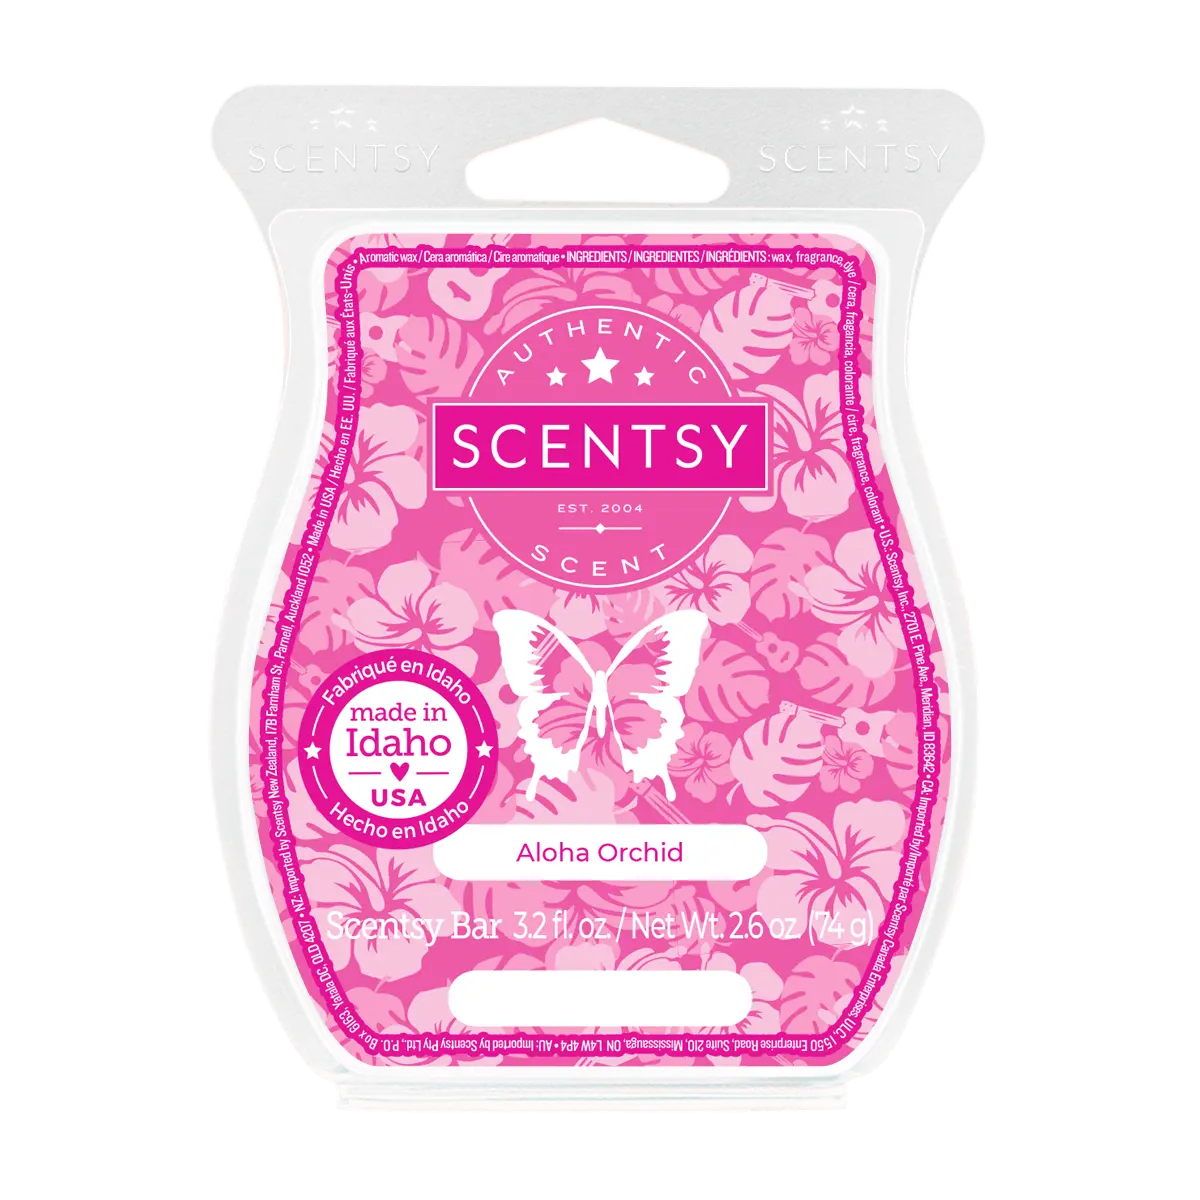 Scentsy Island Days Wax Collection - Scentsy Wax Bars